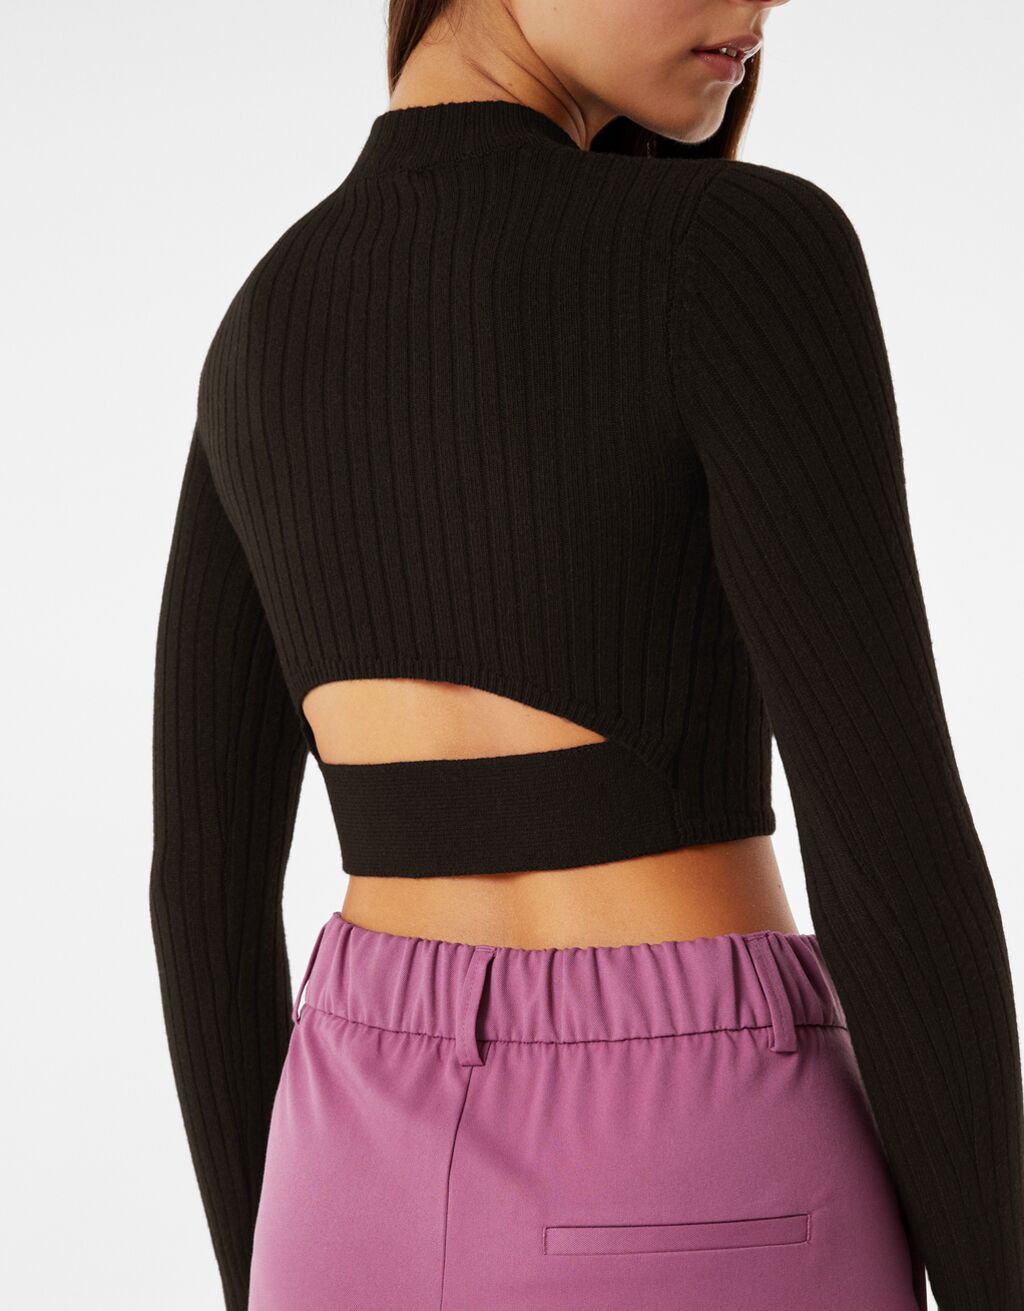 Cropped ribbed high neck sweater with cut-out back